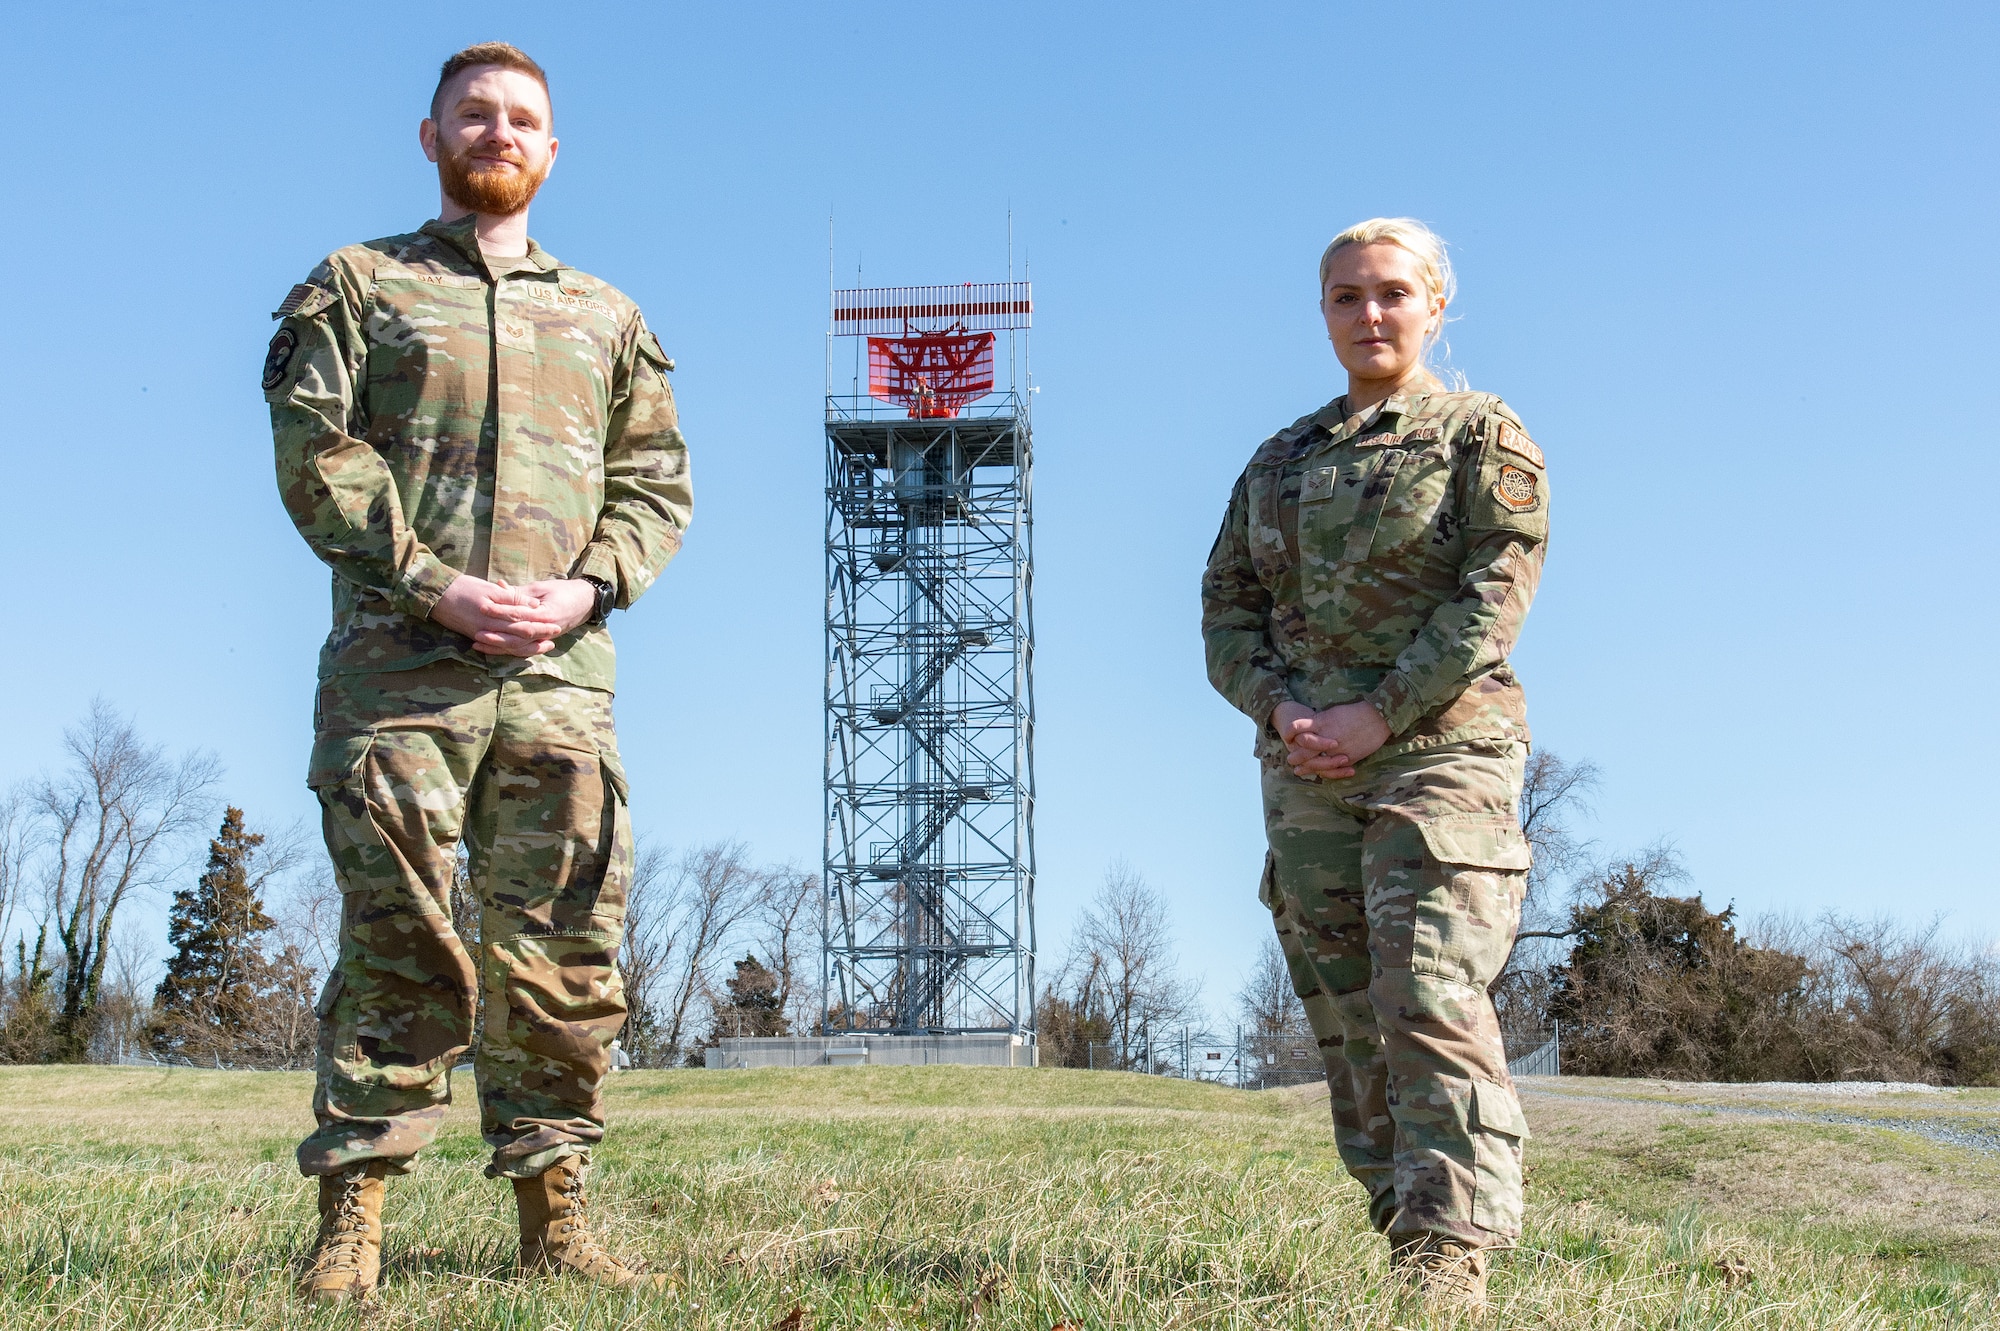 U.S. Air Force Staff Sgt. Colton Day, left, 436th Operations Support Squadron Radar, Airfield and Weather Systems supervisor and U.S. Air Force Senior Airman Alyssa Zydel, right, 436th OSS RAWS supervisor, stand near the radar tower at Dover Air Force Base, Delaware, March 11, 2024. Day was recognized as the 2023 Air Mobility Command RAWS Trainer of the Year and Zydel was recognized as the 2023 AMC RAWS Airman of the Year. (U.S. Air Force photo by Roland Balik)